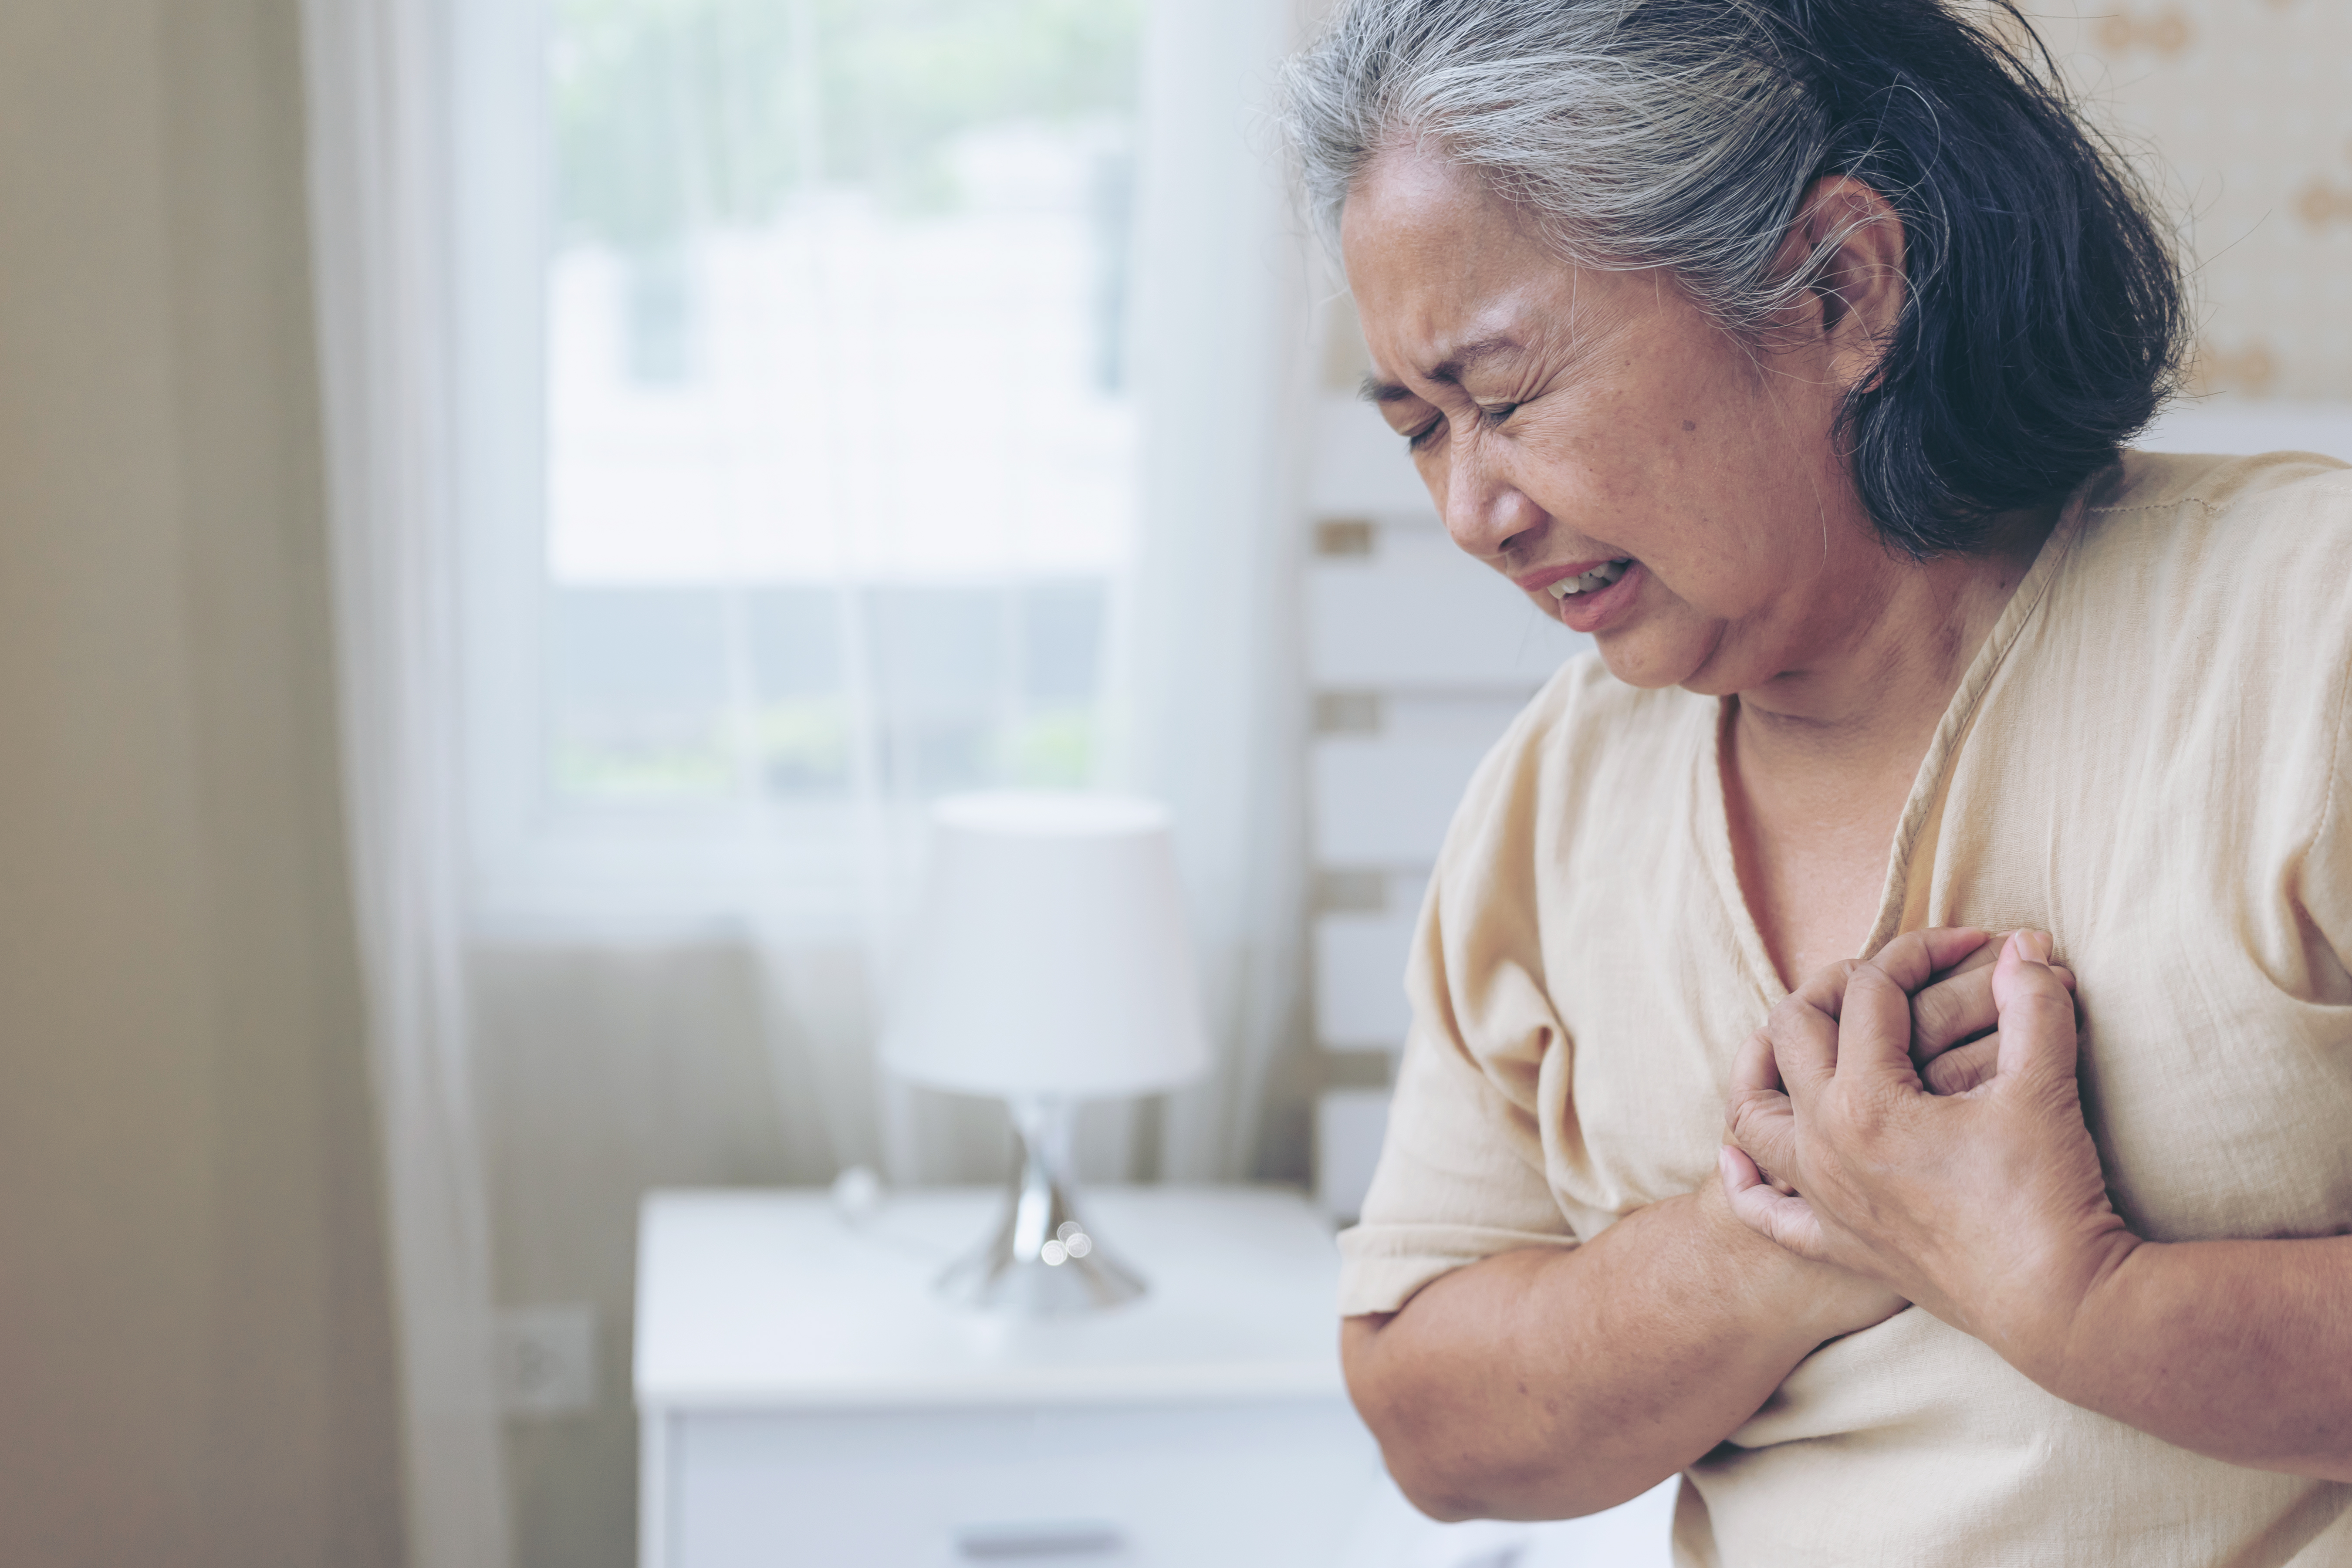 A woman clutching her chest in pain